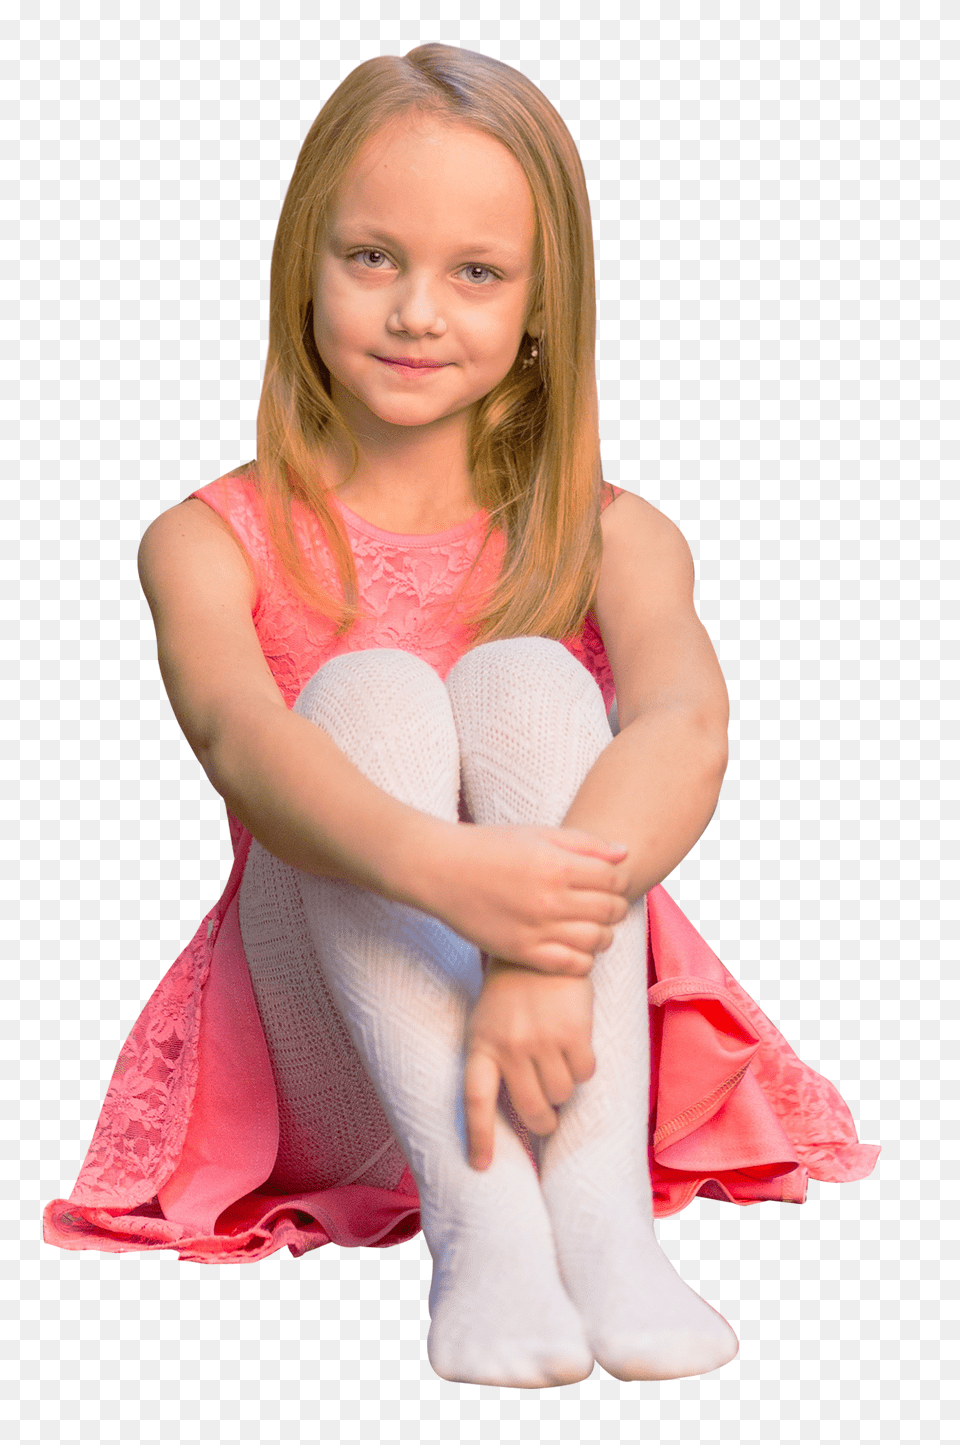 Pngpix Com Pretty Little Girl Sitting On The Floor Image, Person, Head, Photography, Portrait Free Png